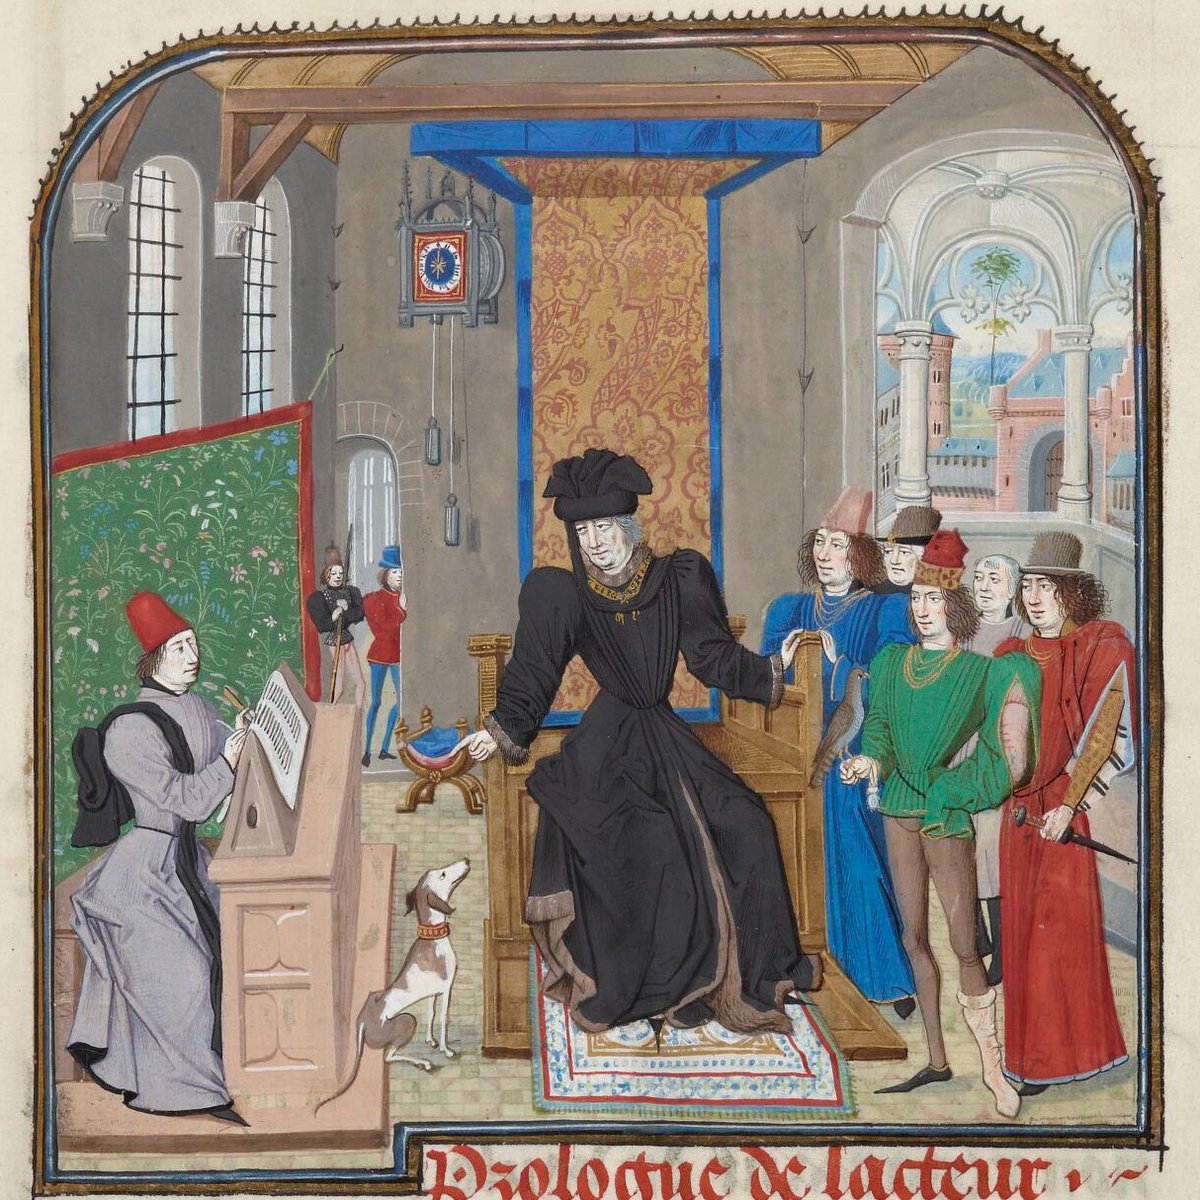 Initial page of a 15th c. copy of Philippe Camus, Histoire d'Olivier de Castille. Philip III the Good, dedicatee of the work, sits enthroned surrounded by courtiers and points to the author seated at his writing desk... or is he talking to his dog? @GallicaBnF Fr. 12574, f. 1r